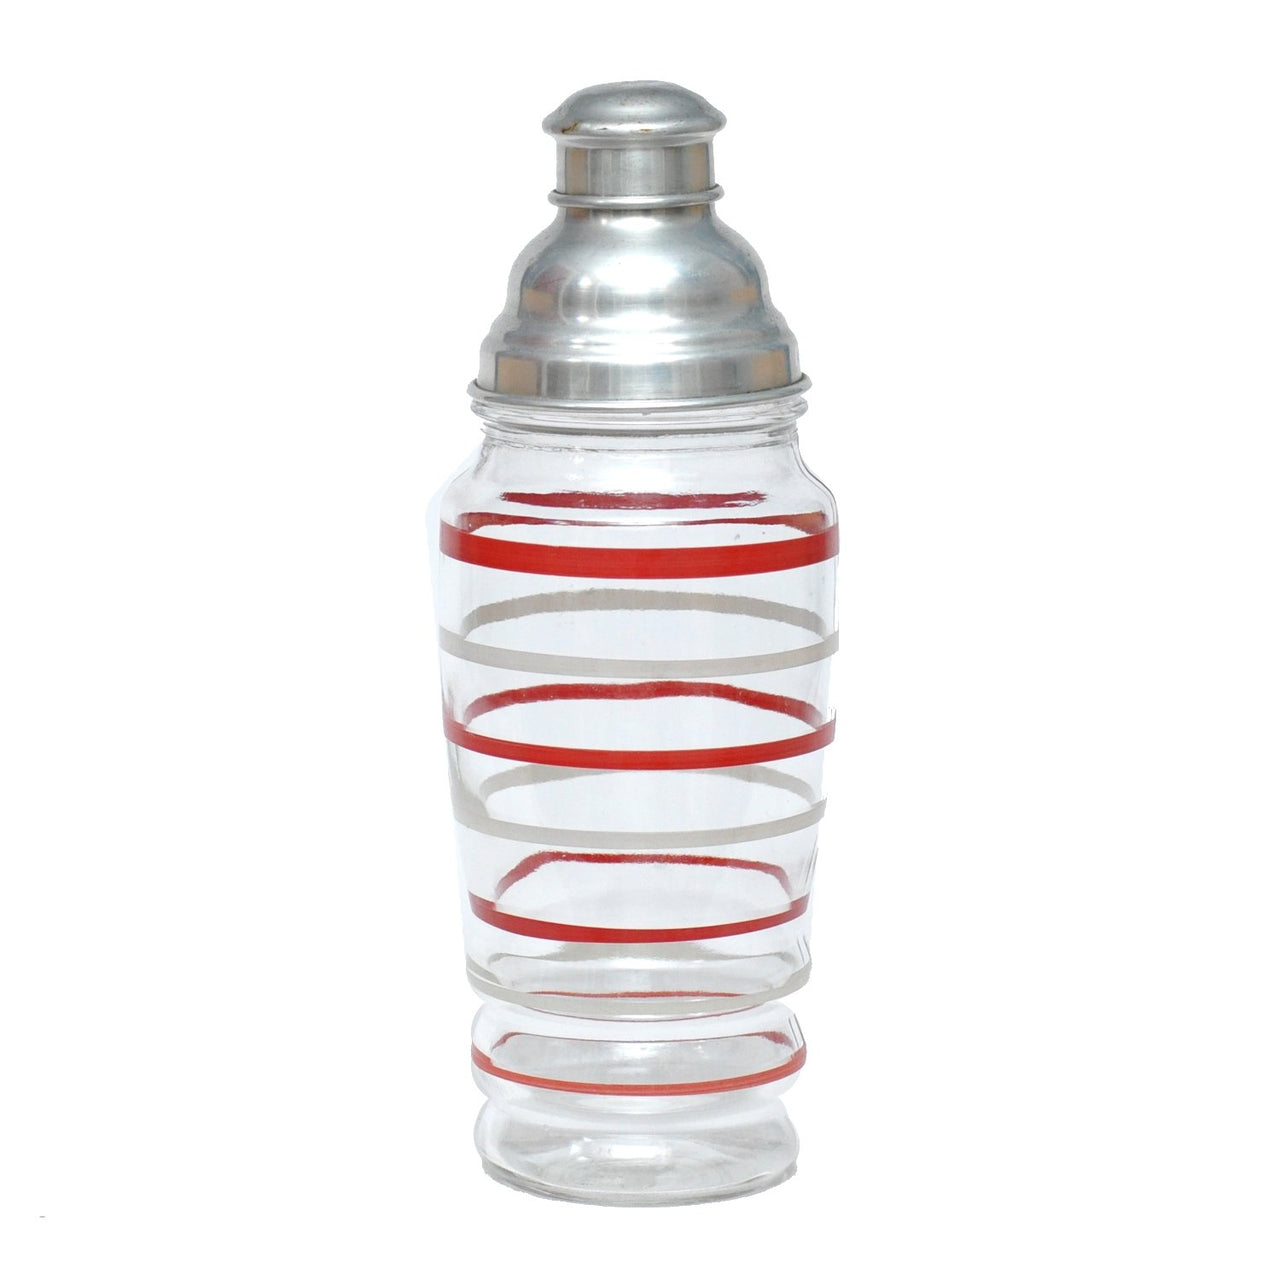 Vintage Red White Striped Glass Shaker | The Hour Shop